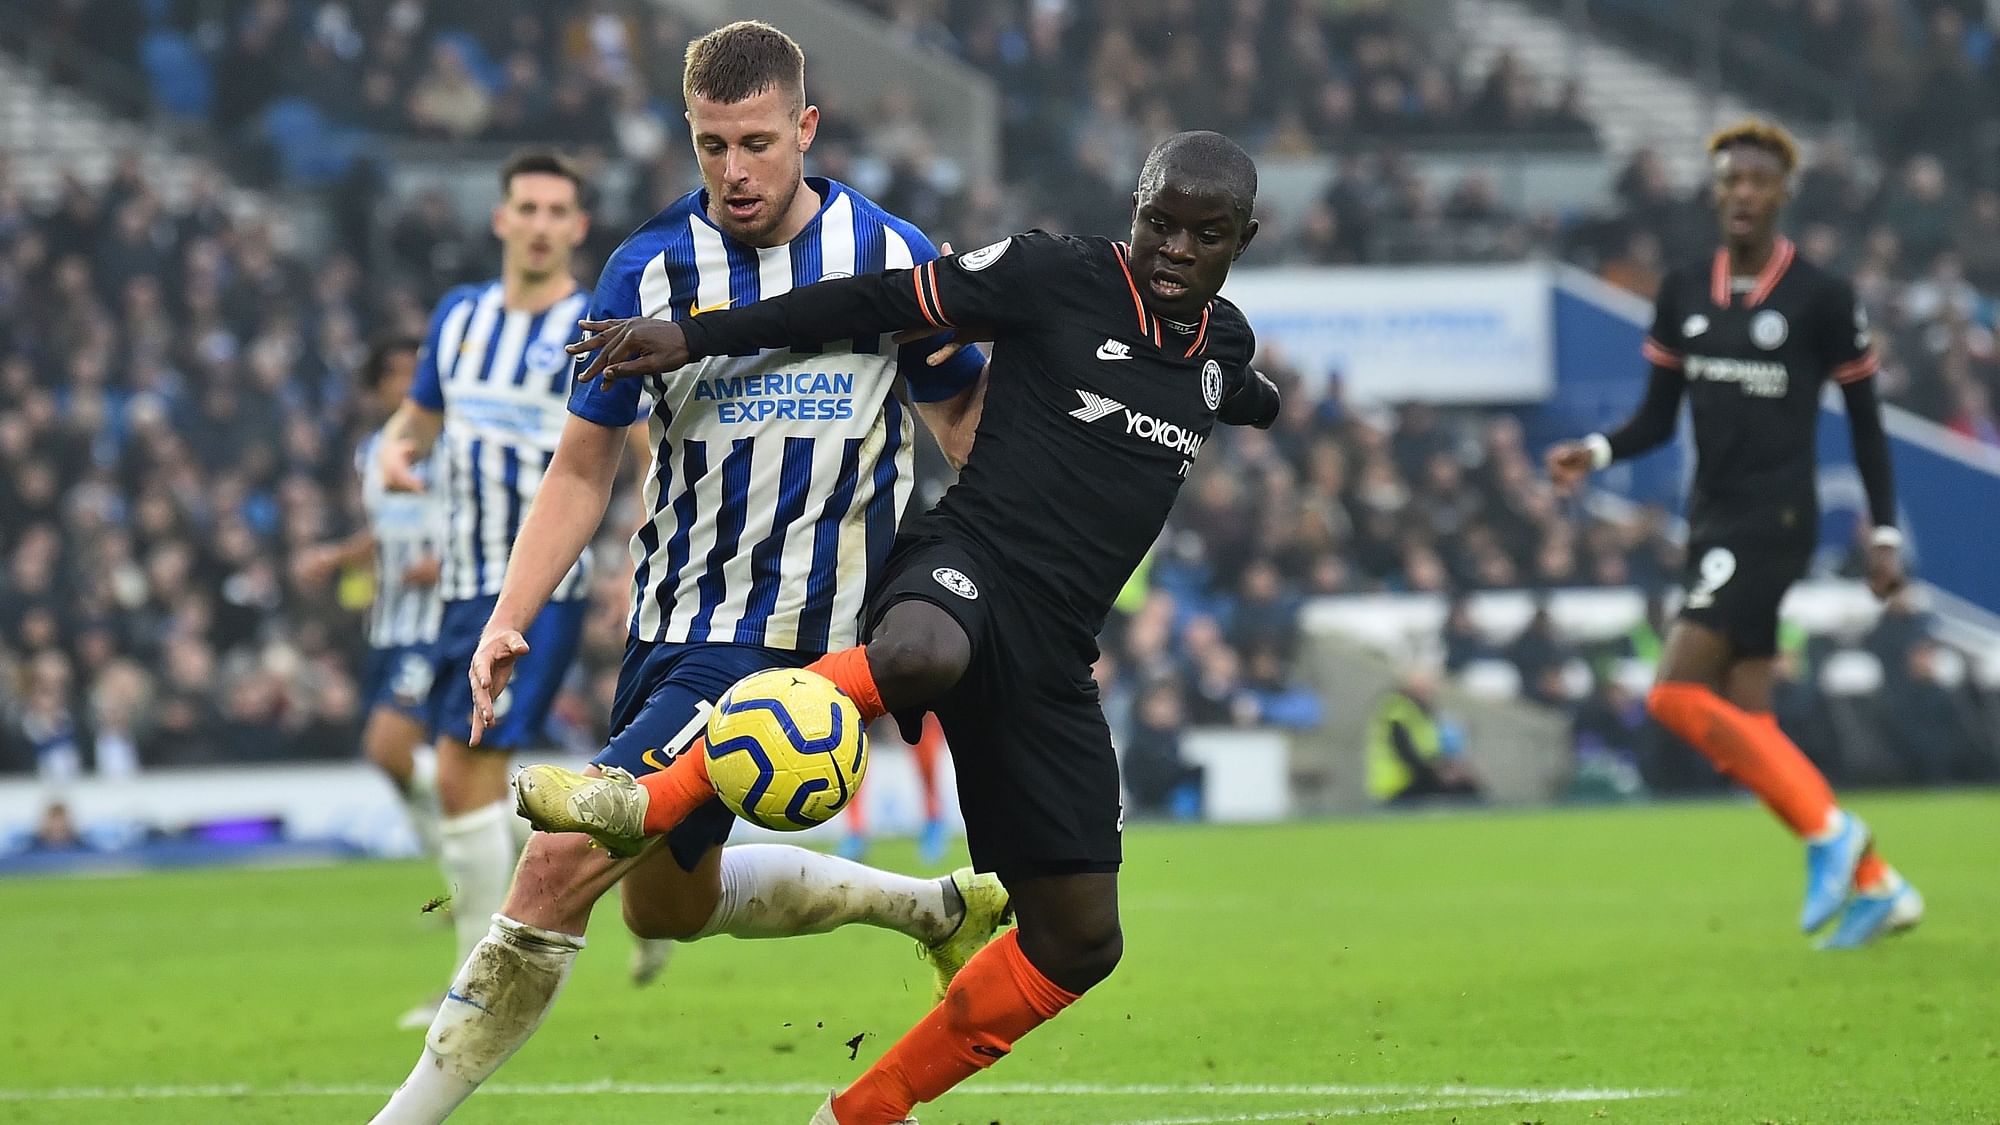 Alireza Jahanbakhsh’s spectacular overhead kick earned Brighton a share of the points against Chelsea and dampened Frank Lampard’s New Year celebrations on Wednesday, 1 January.